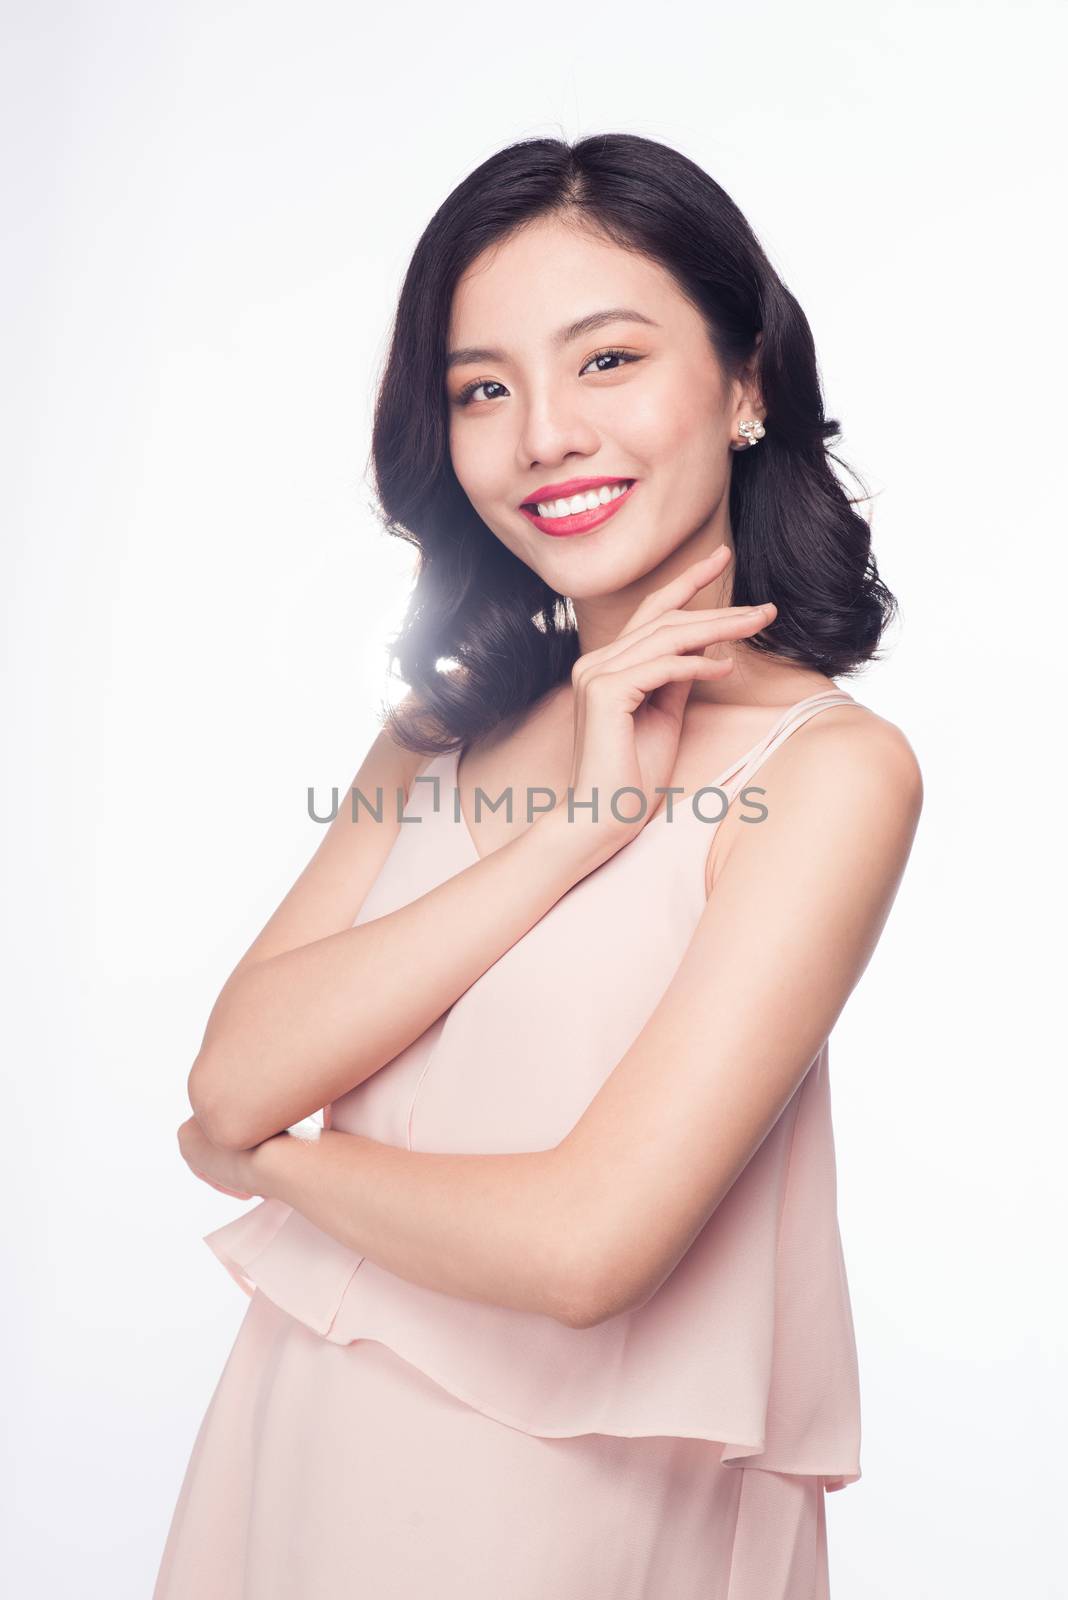 Glamour portrait of beautiful ASIAN woman model with nice makeup and romantic wavy hairstyle.